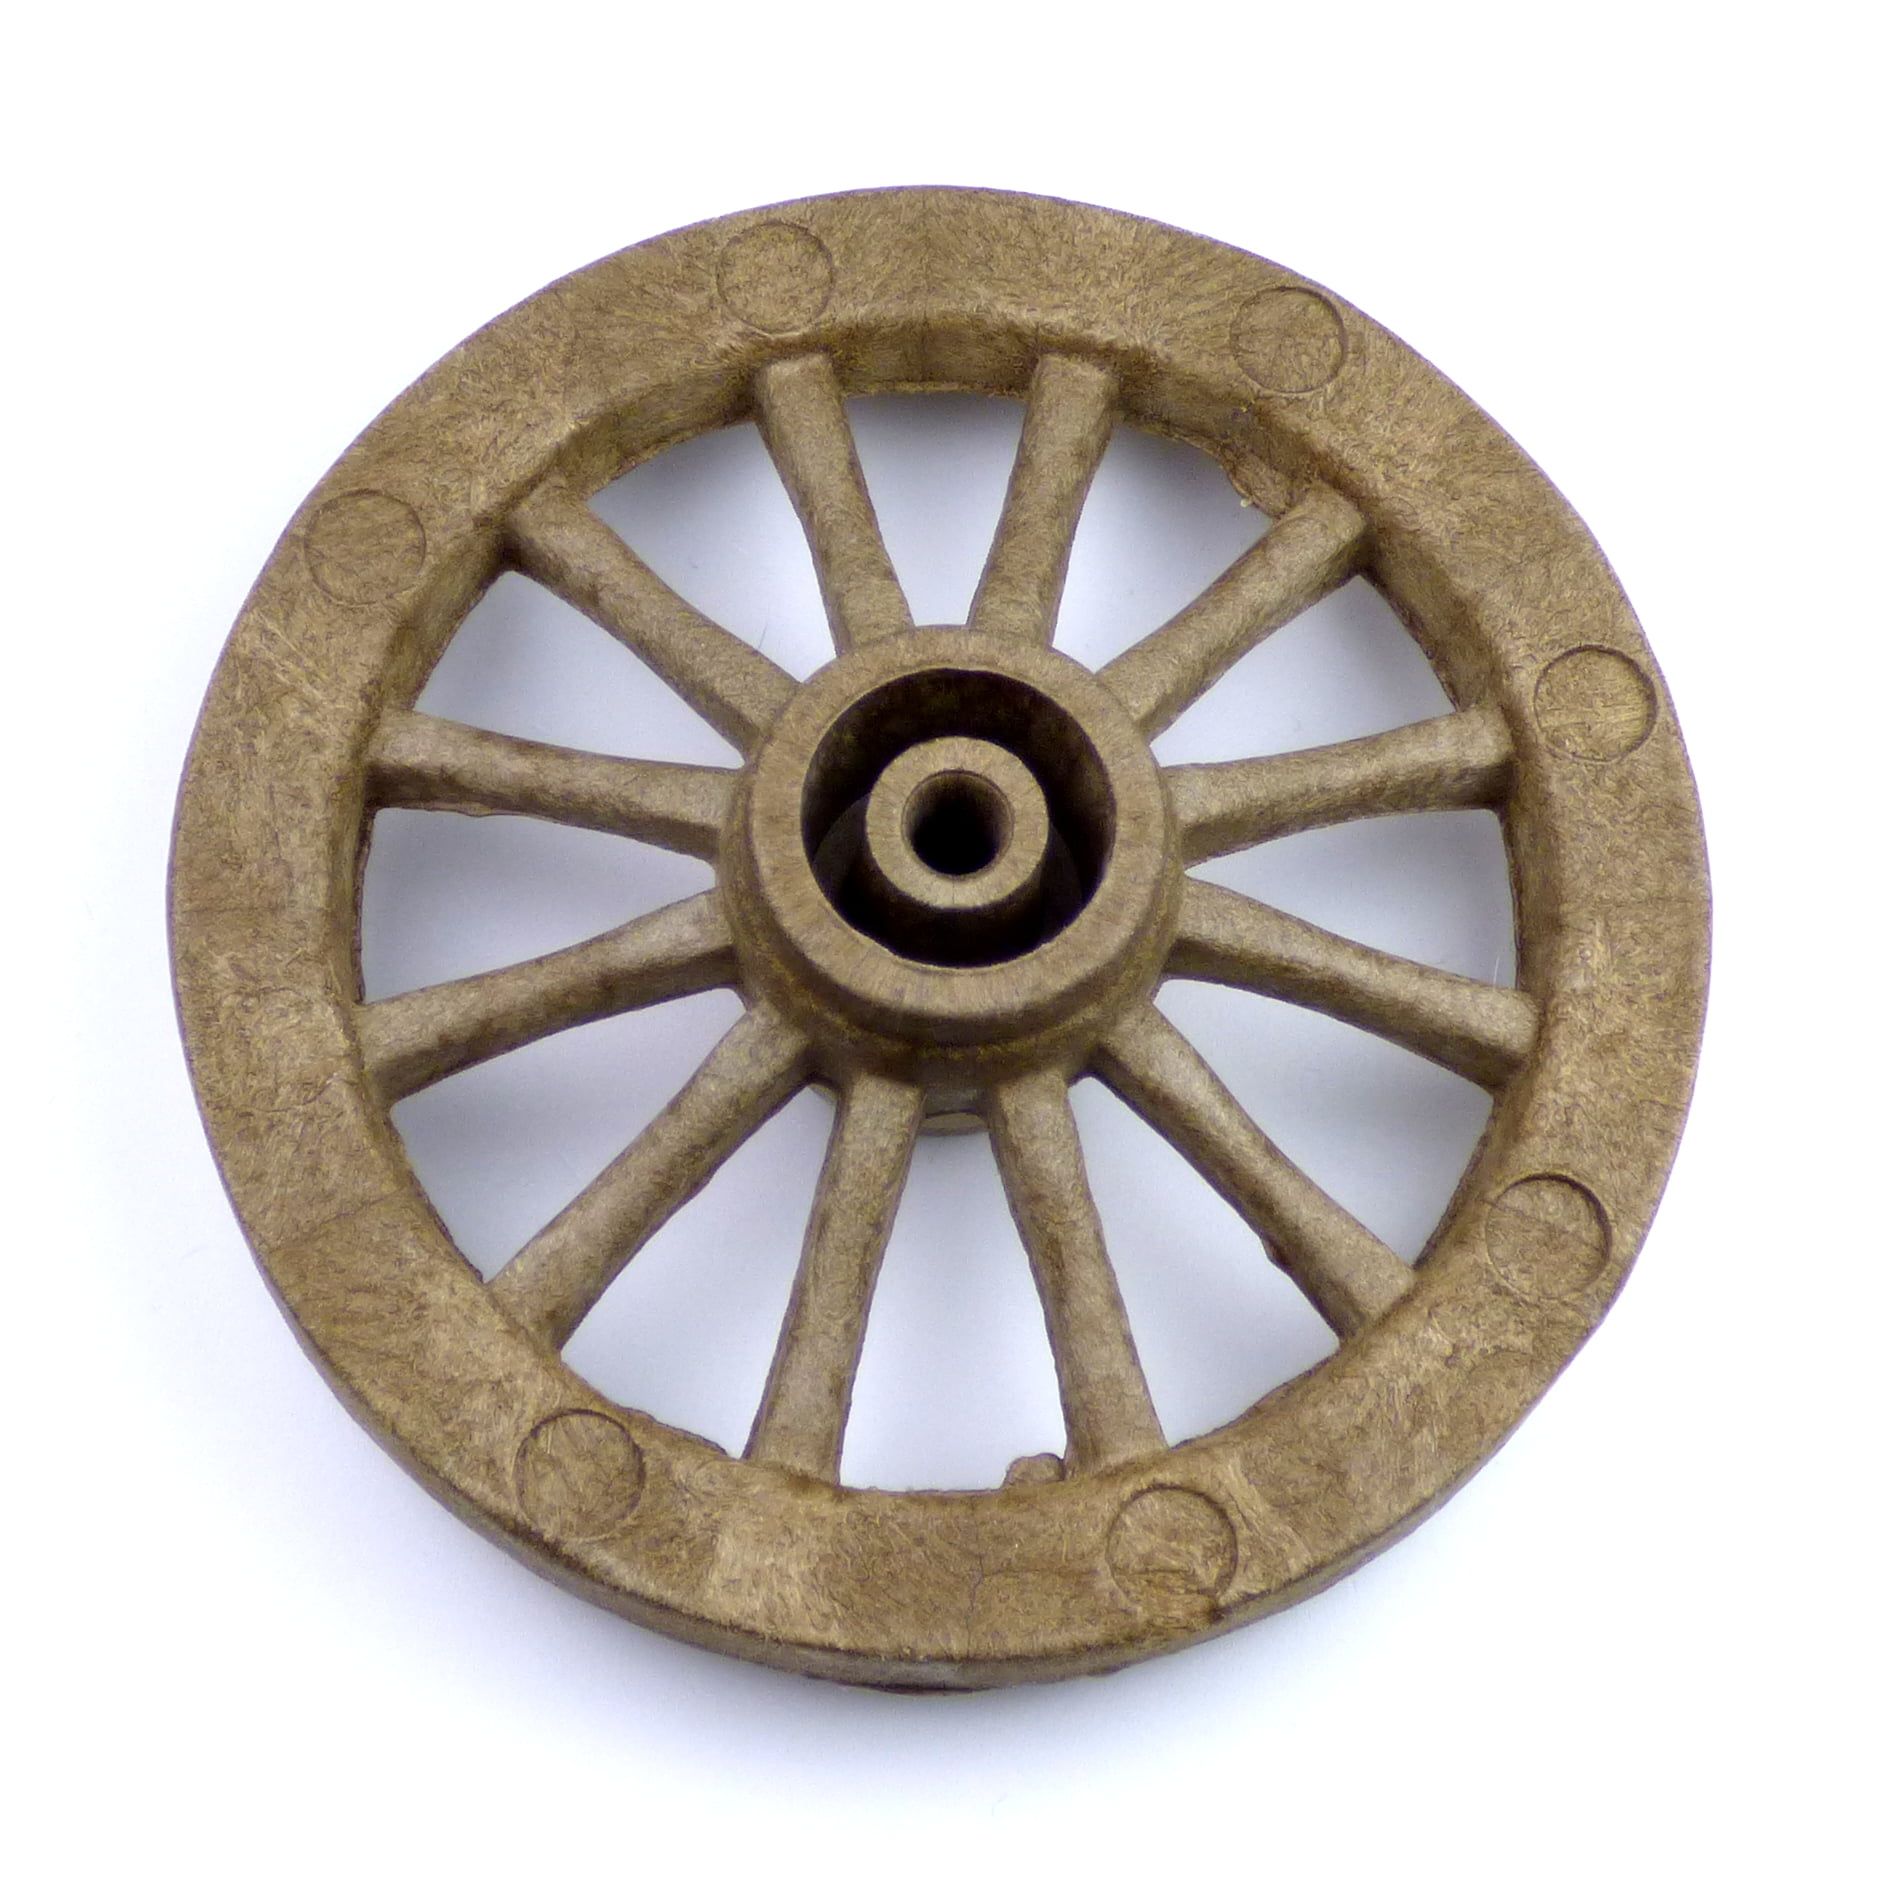 Plastic Scale Cart Wheels 70mm Diameter For Carts and Wagons